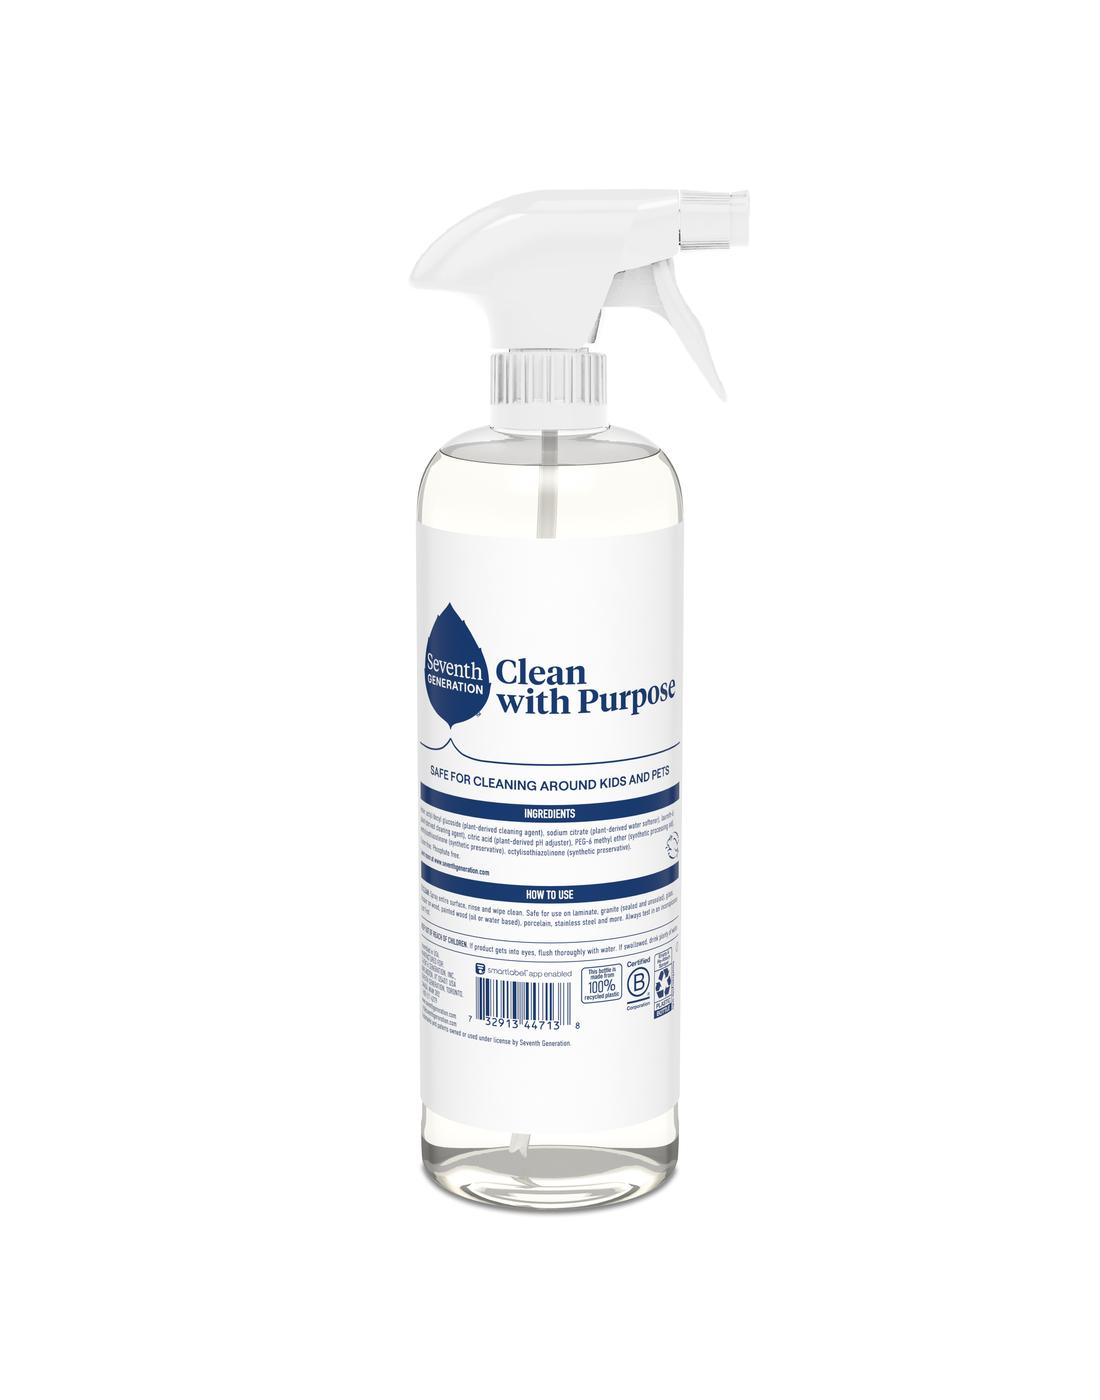 Seventh Generation Free & Clear All Purpose Cleaner; image 2 of 4